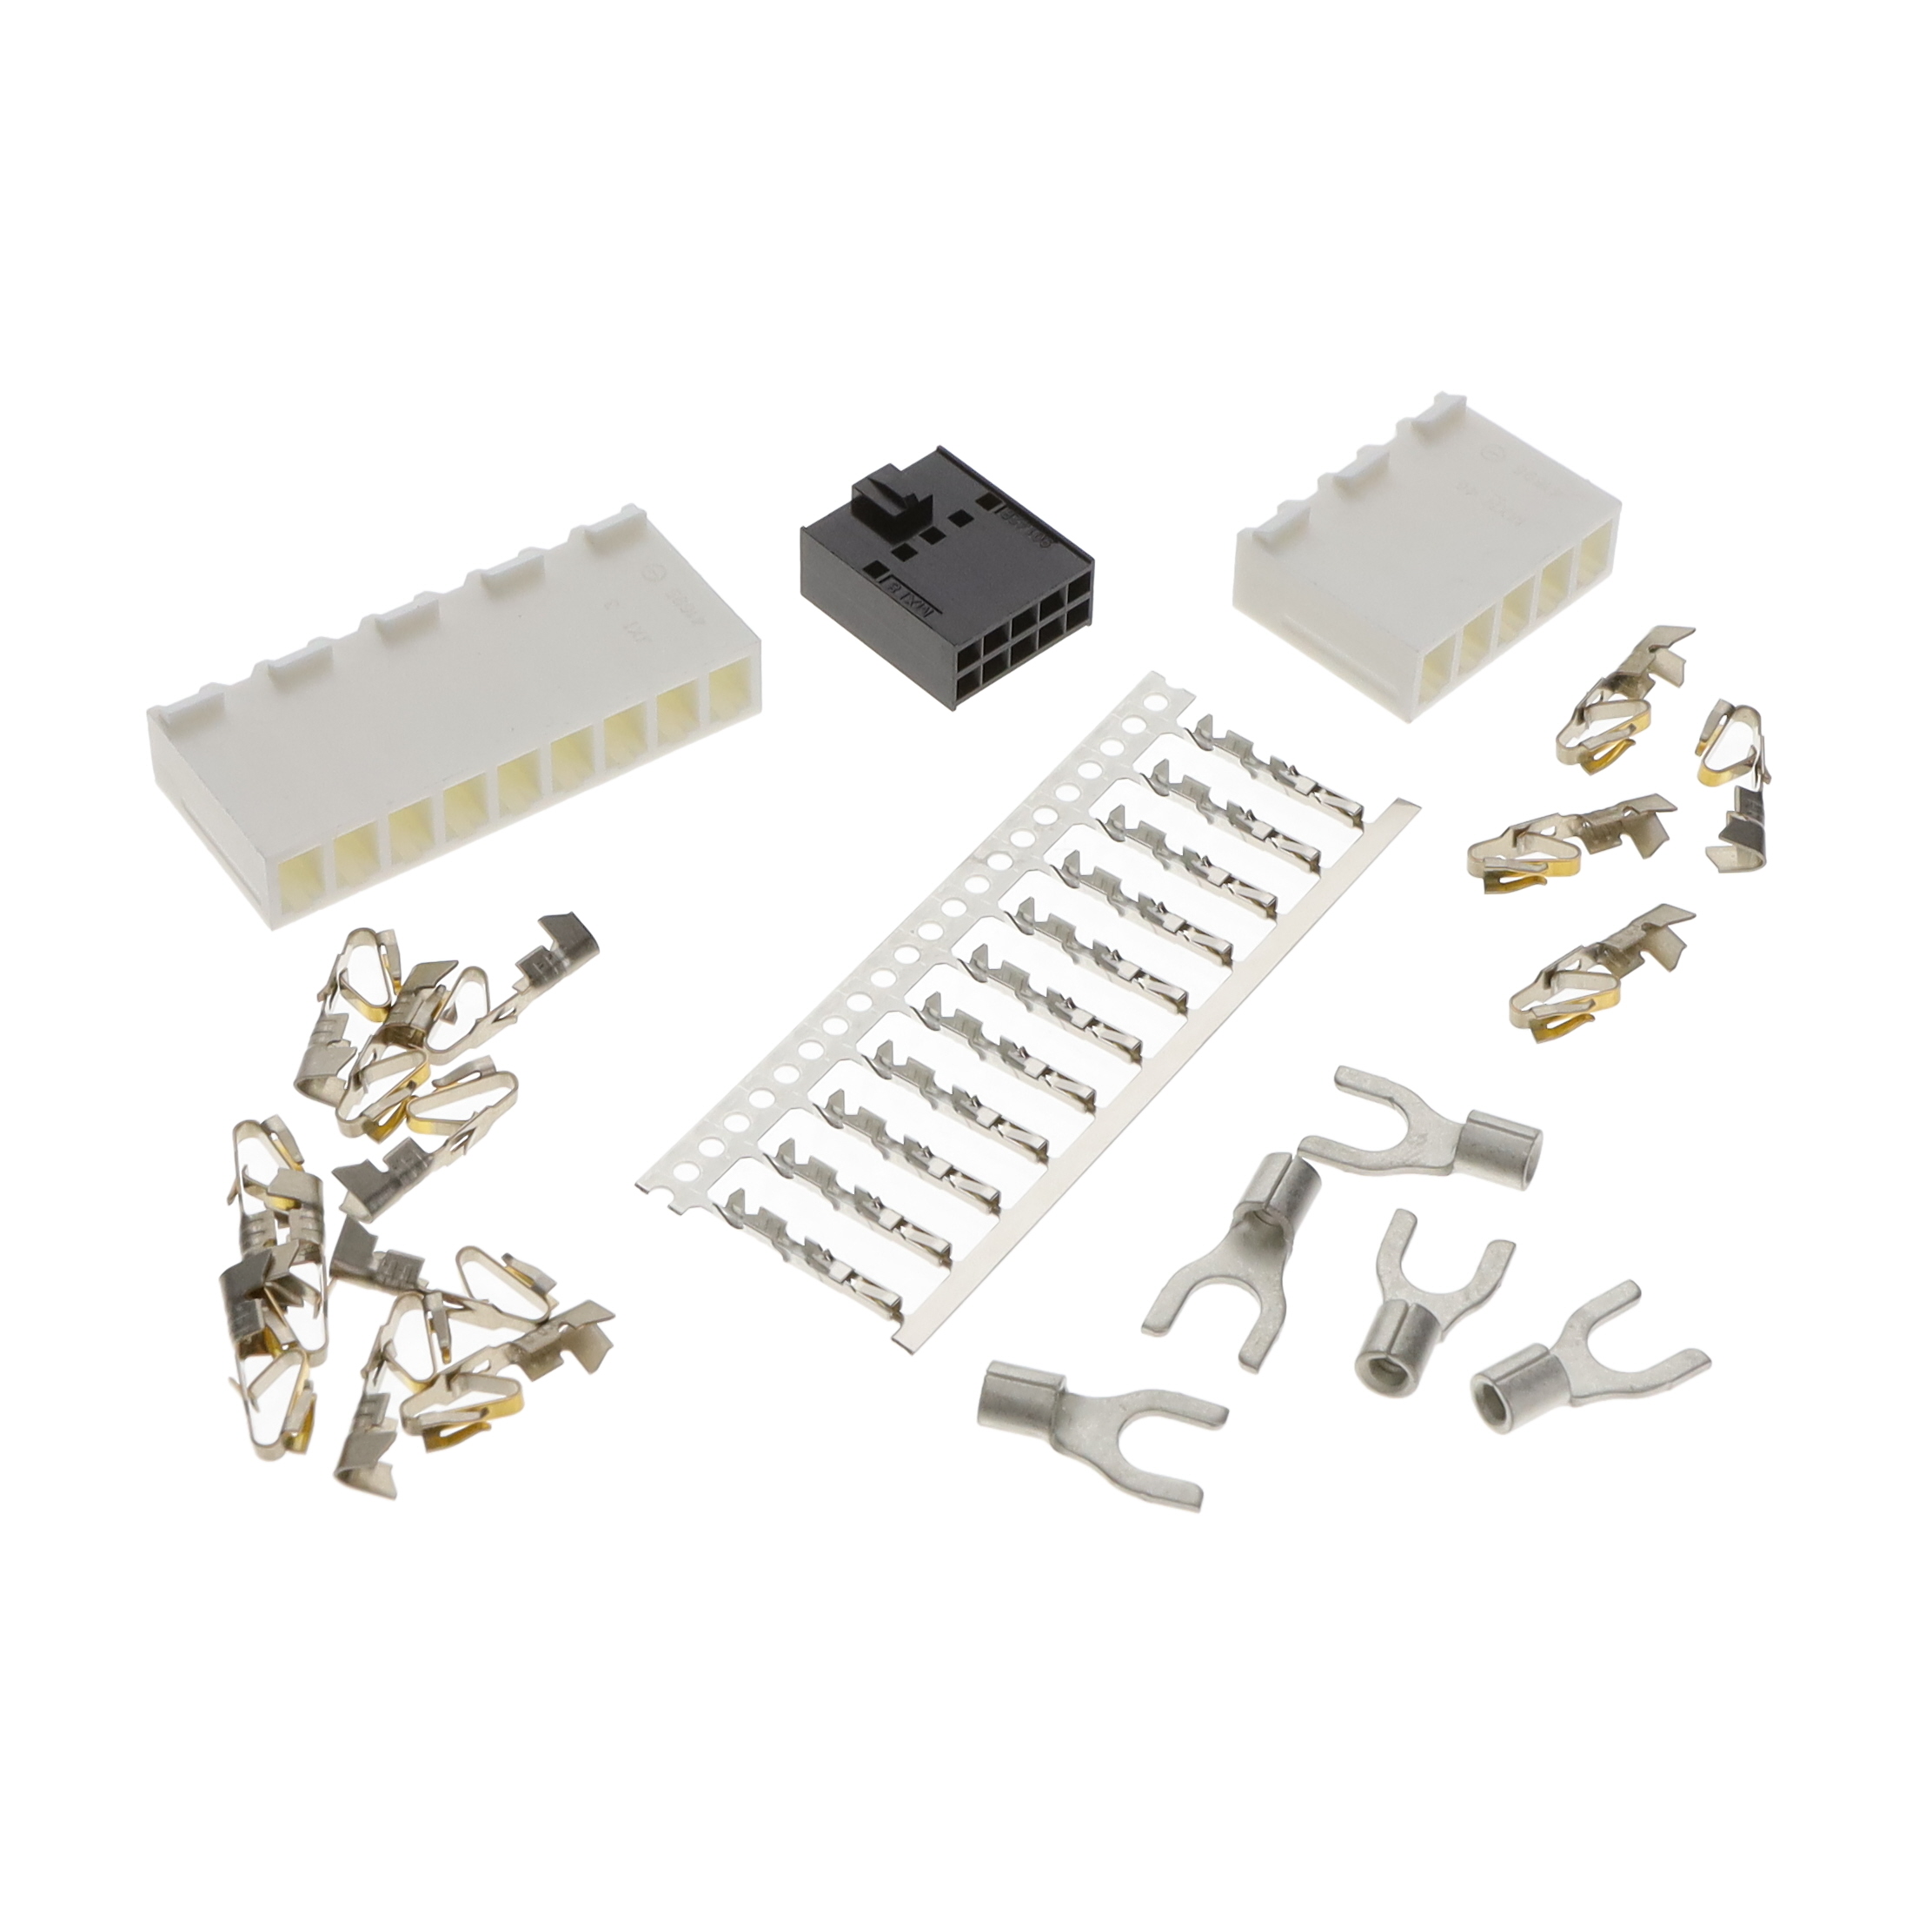 【70-841-015】CONNECTOR KIT FOR LPQ170